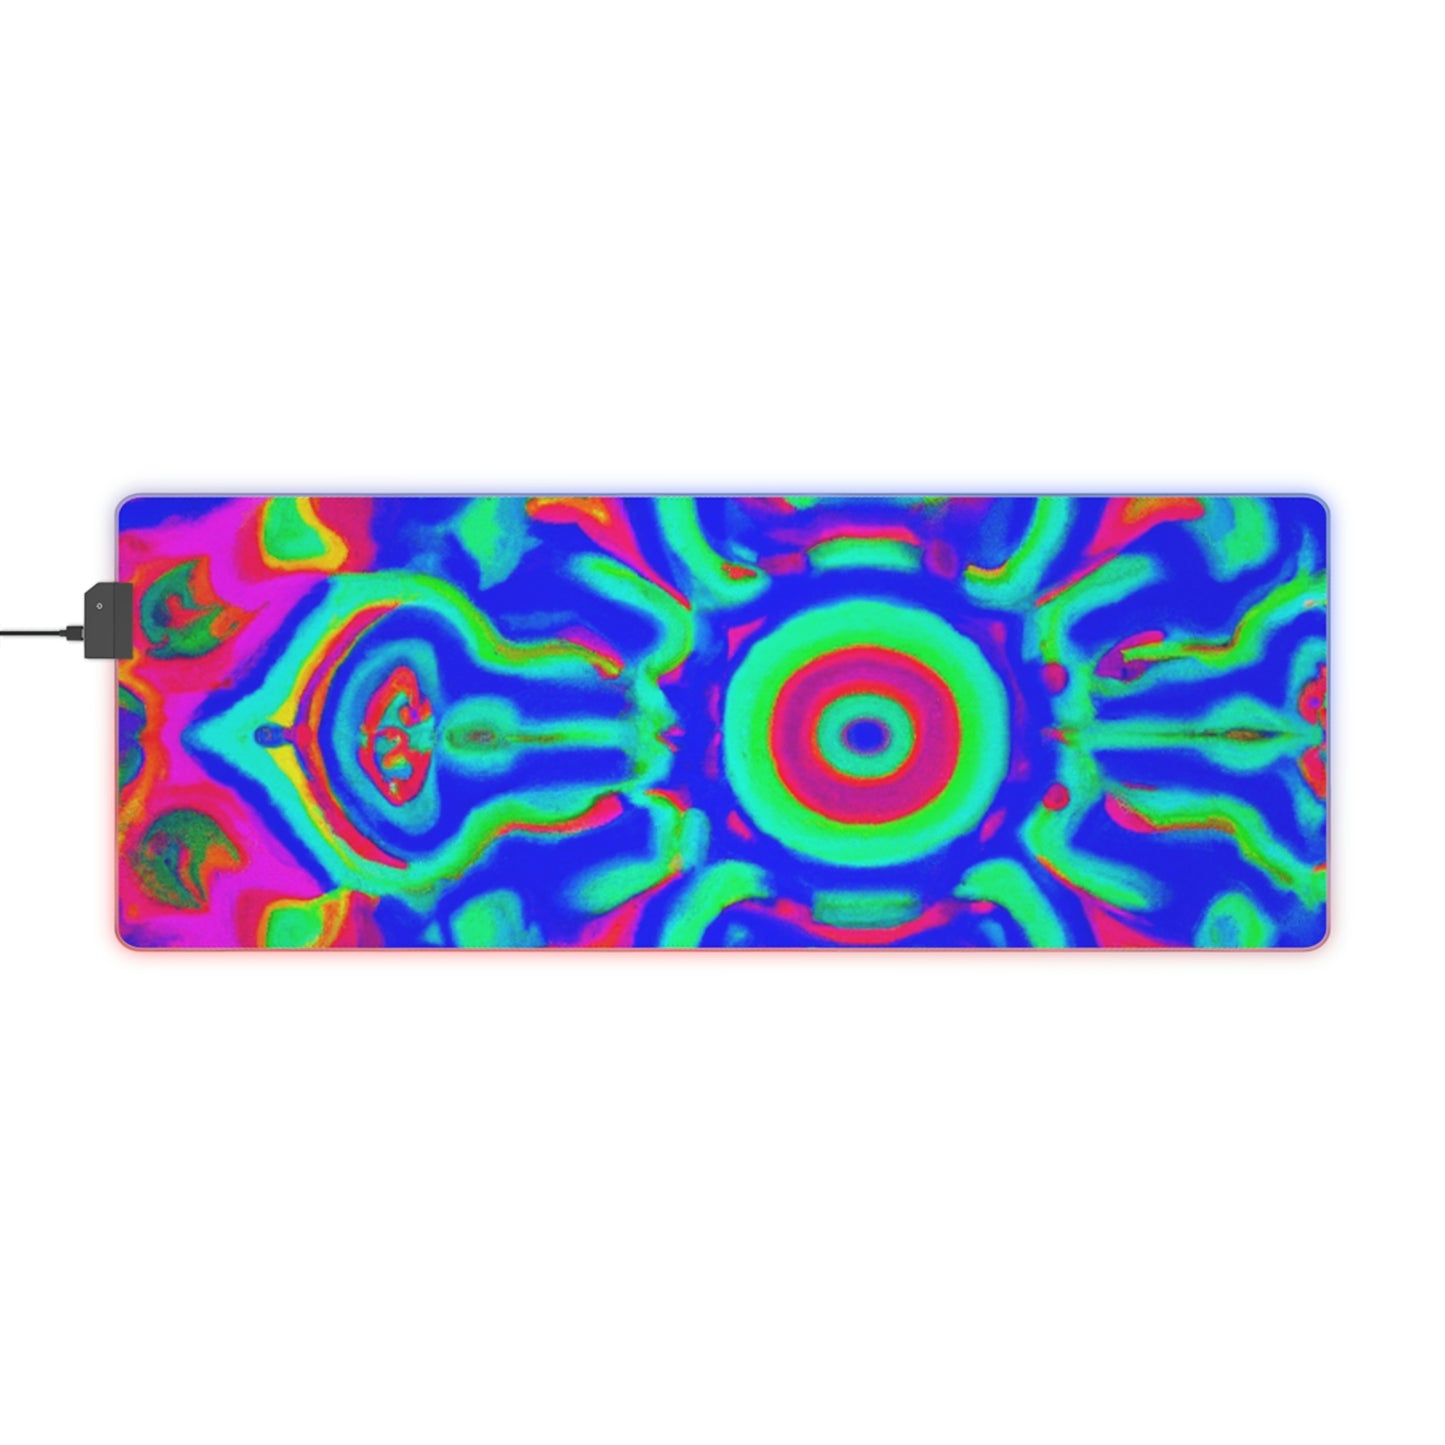 Rocky Polka - Psychedelic Trippy LED Light Up Gaming Mouse Pad